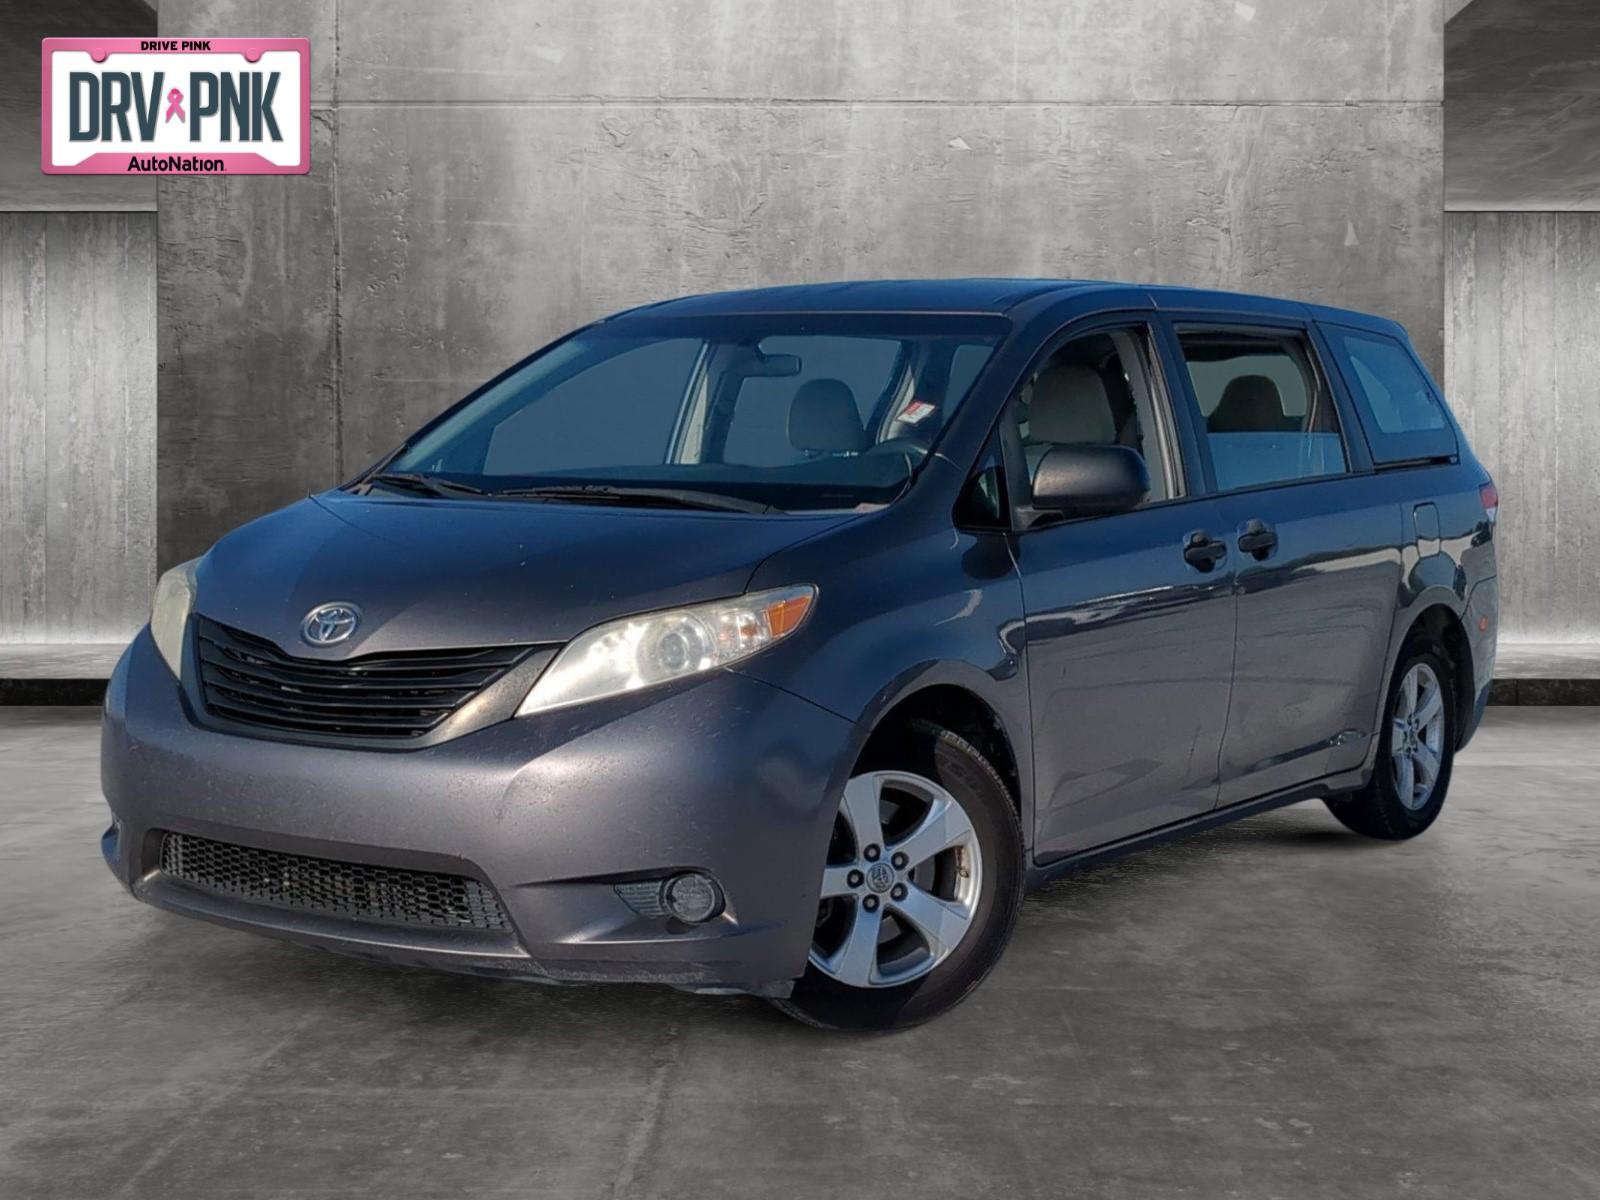 2014 Toyota Sienna Vehicle Photo in Ft. Myers, FL 33907